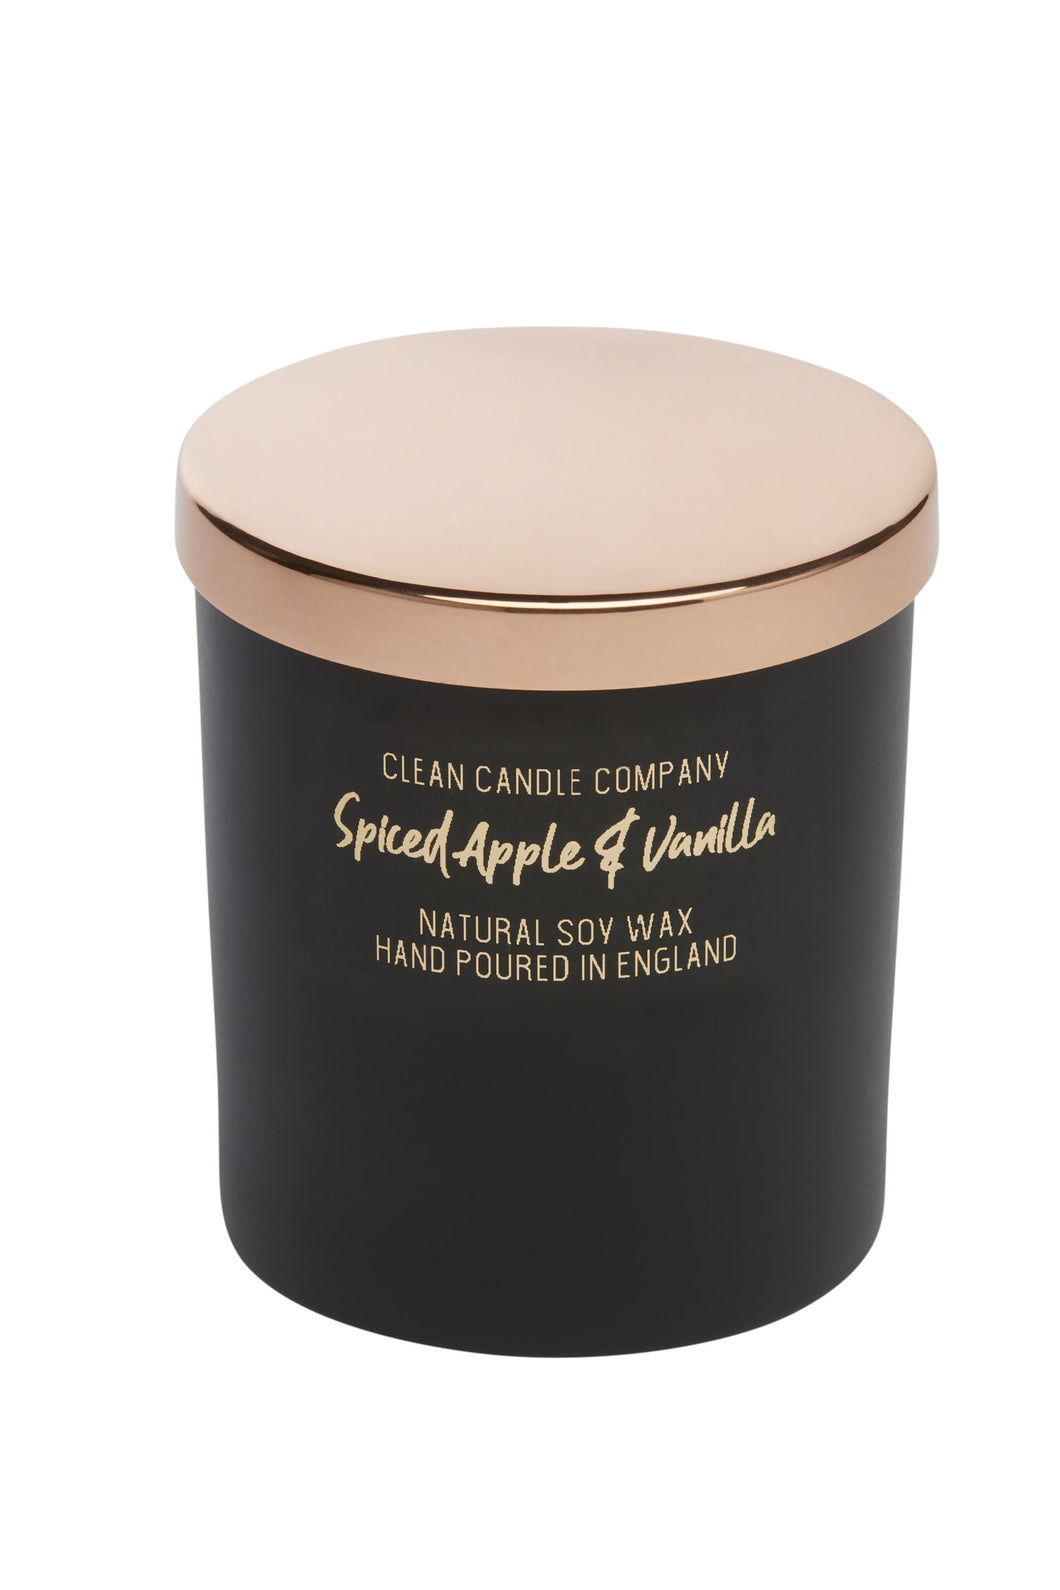 Spiced Apple & Vanilla Soy Wax Candle in Black Glass Jar with Rose Gold Lid